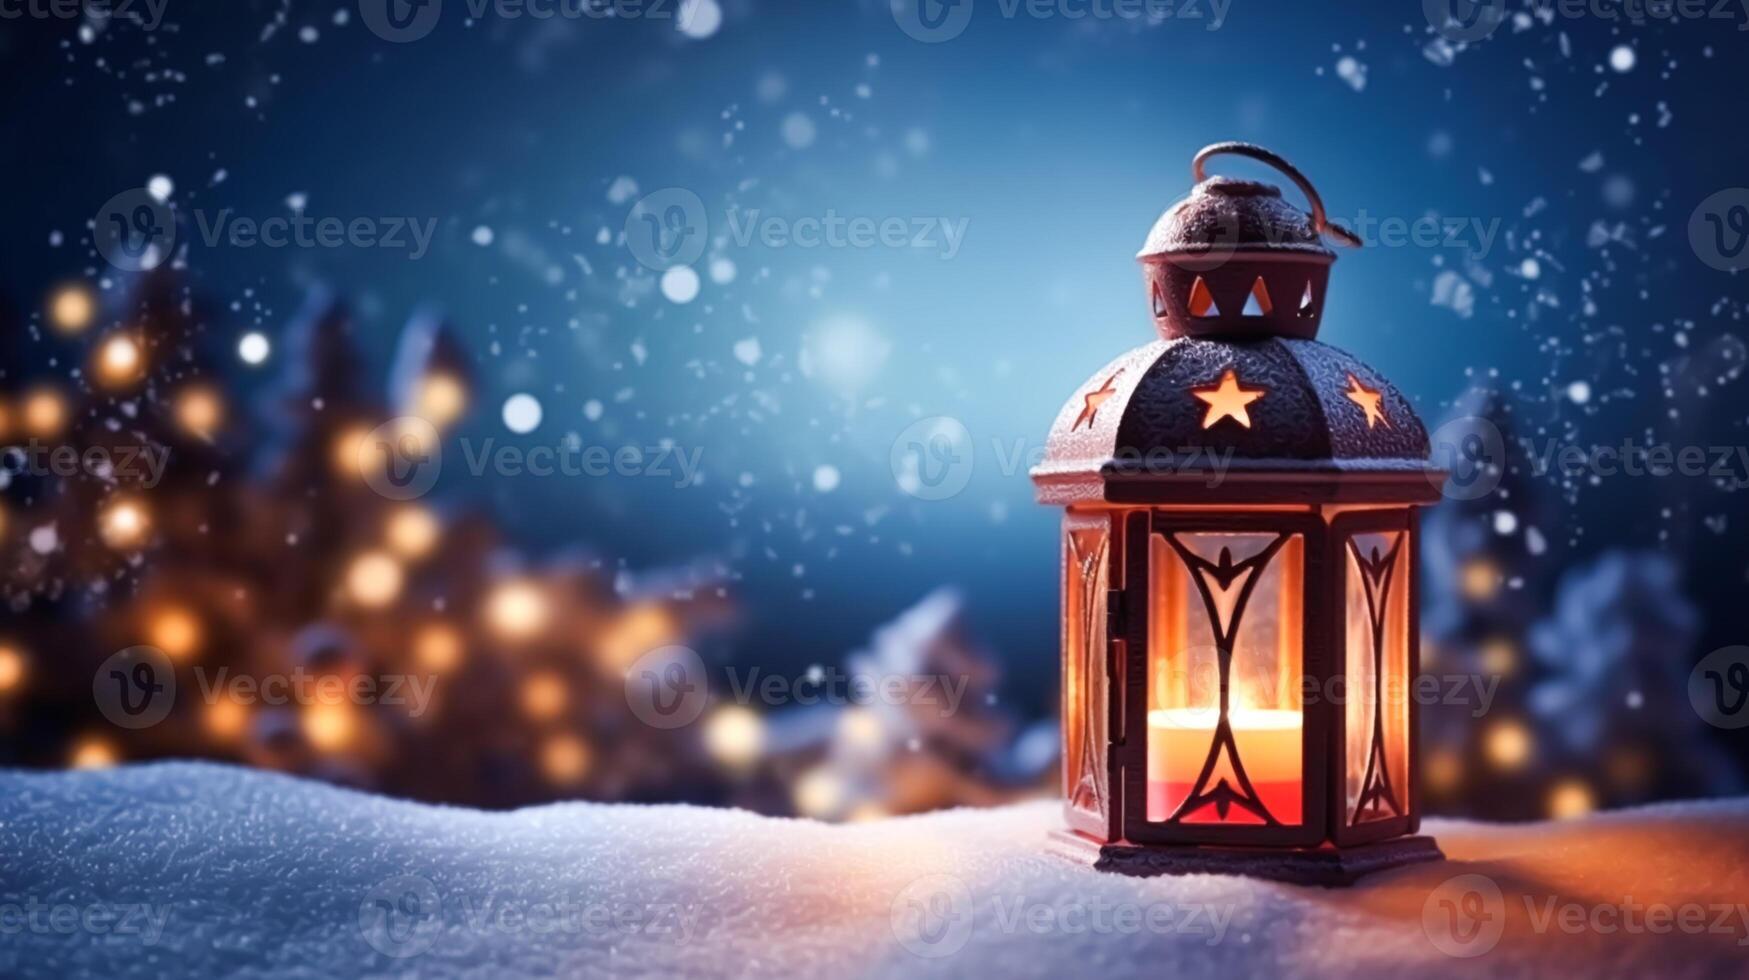 Vintage Christmas lantern on snow as magic night winter holiday background, Merry Christmas and Happy Holidays wishes, photo